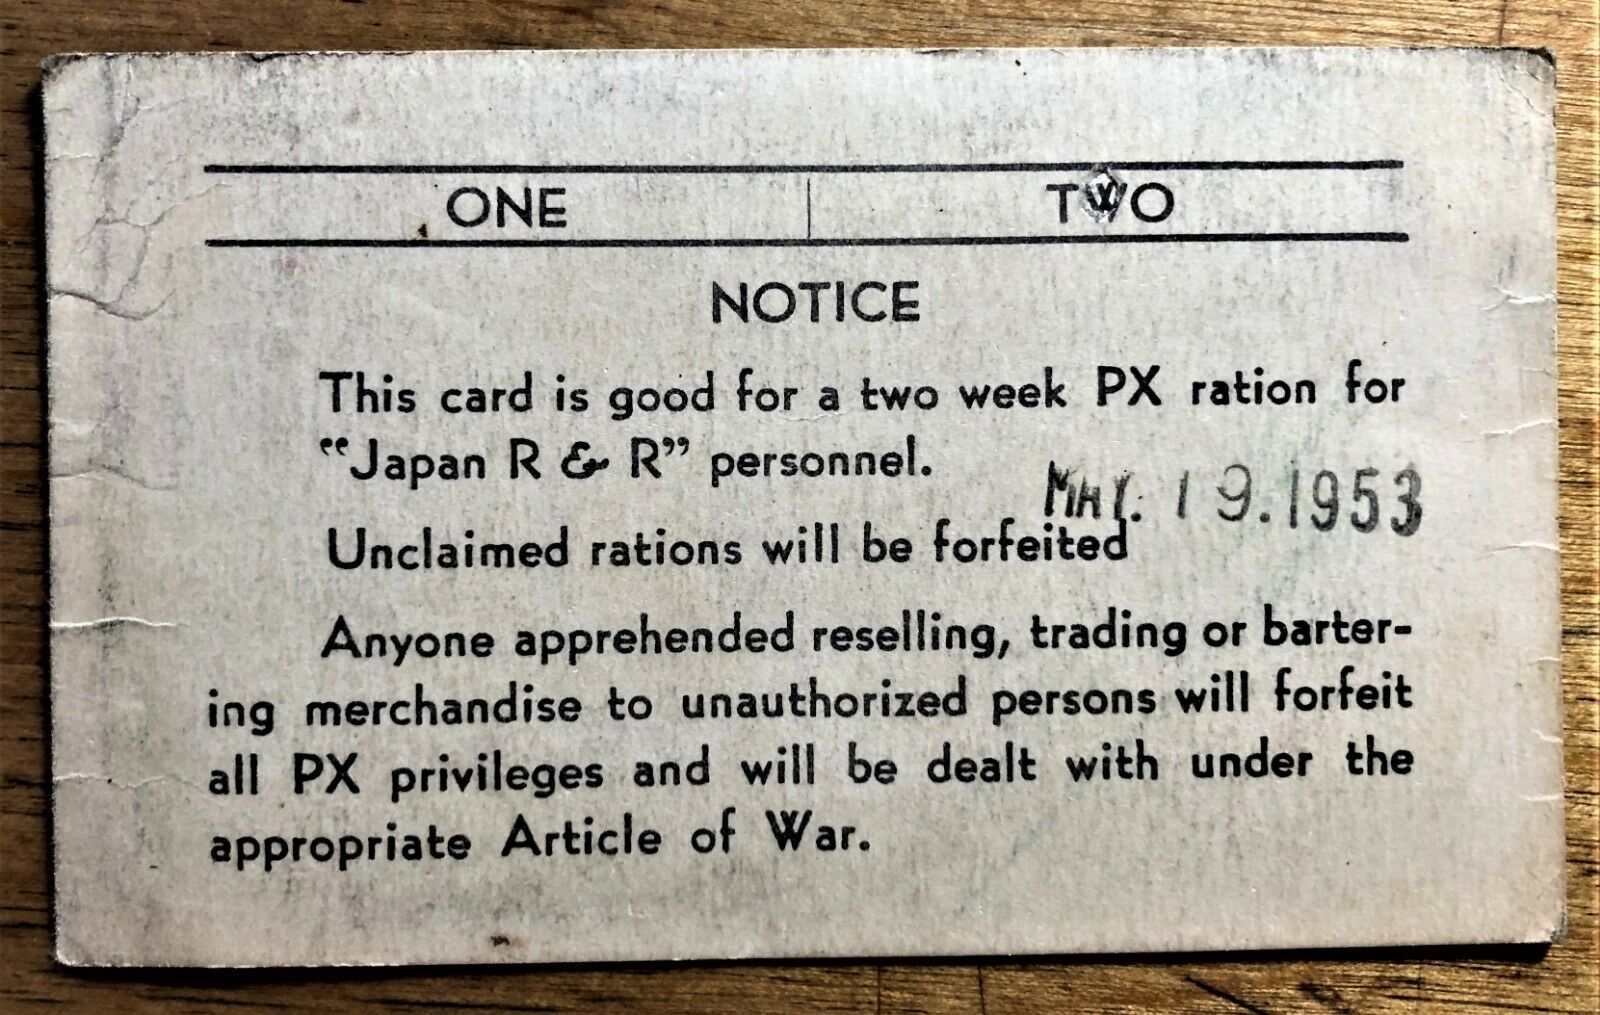 TEMPORARY MEN'S RATION (2 WEEKS at the PX) CARD JAPAN R & R DATED MAY 19  |  1953